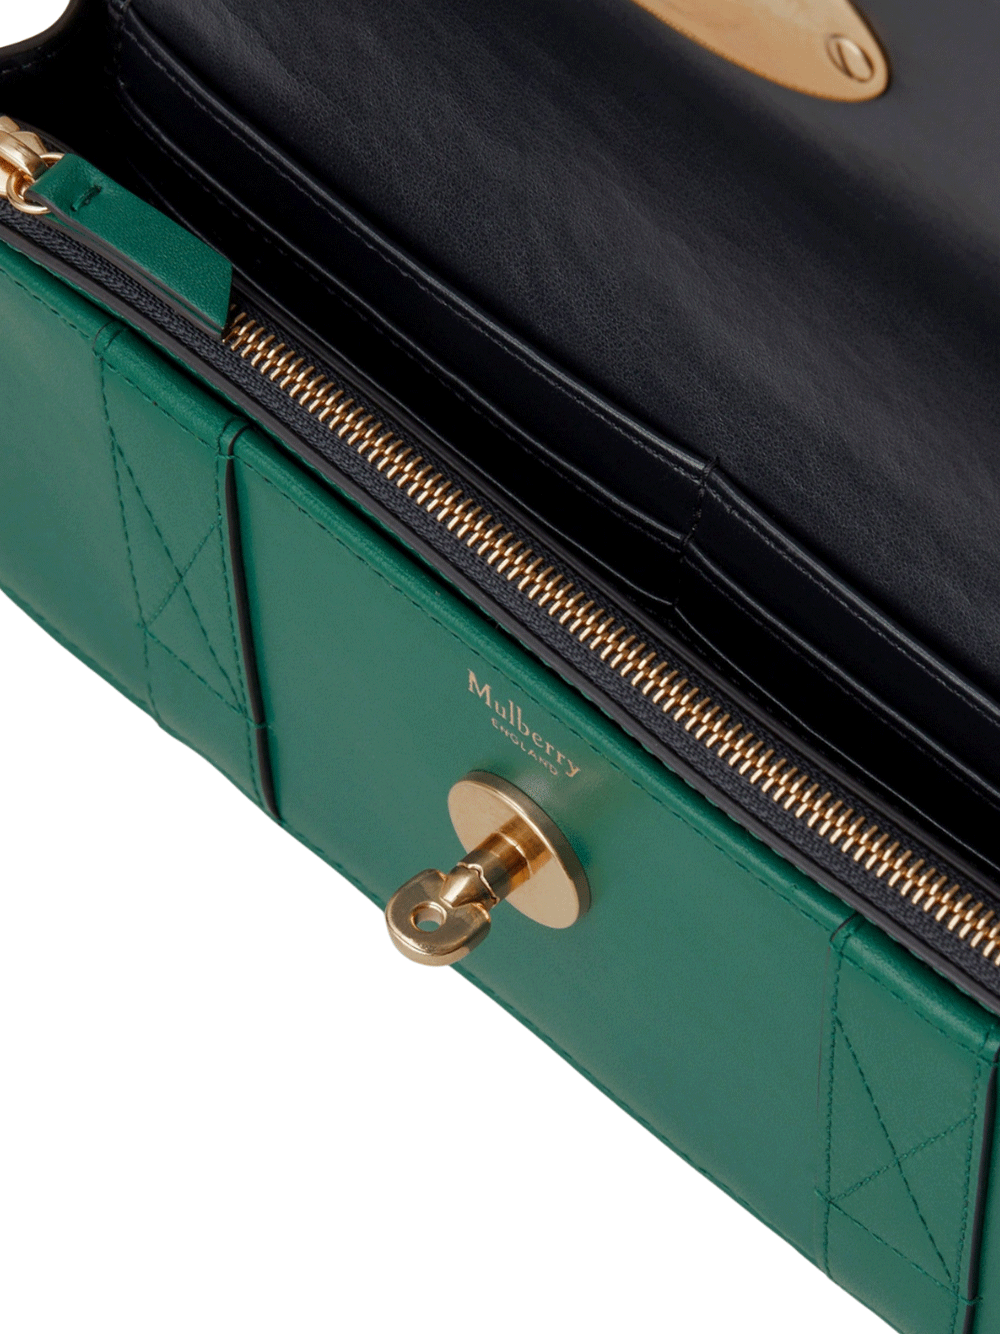 Mulberry-East-West-Bayswater-Clutch-Malachite-High-Gloss-Leather-Malachite-4